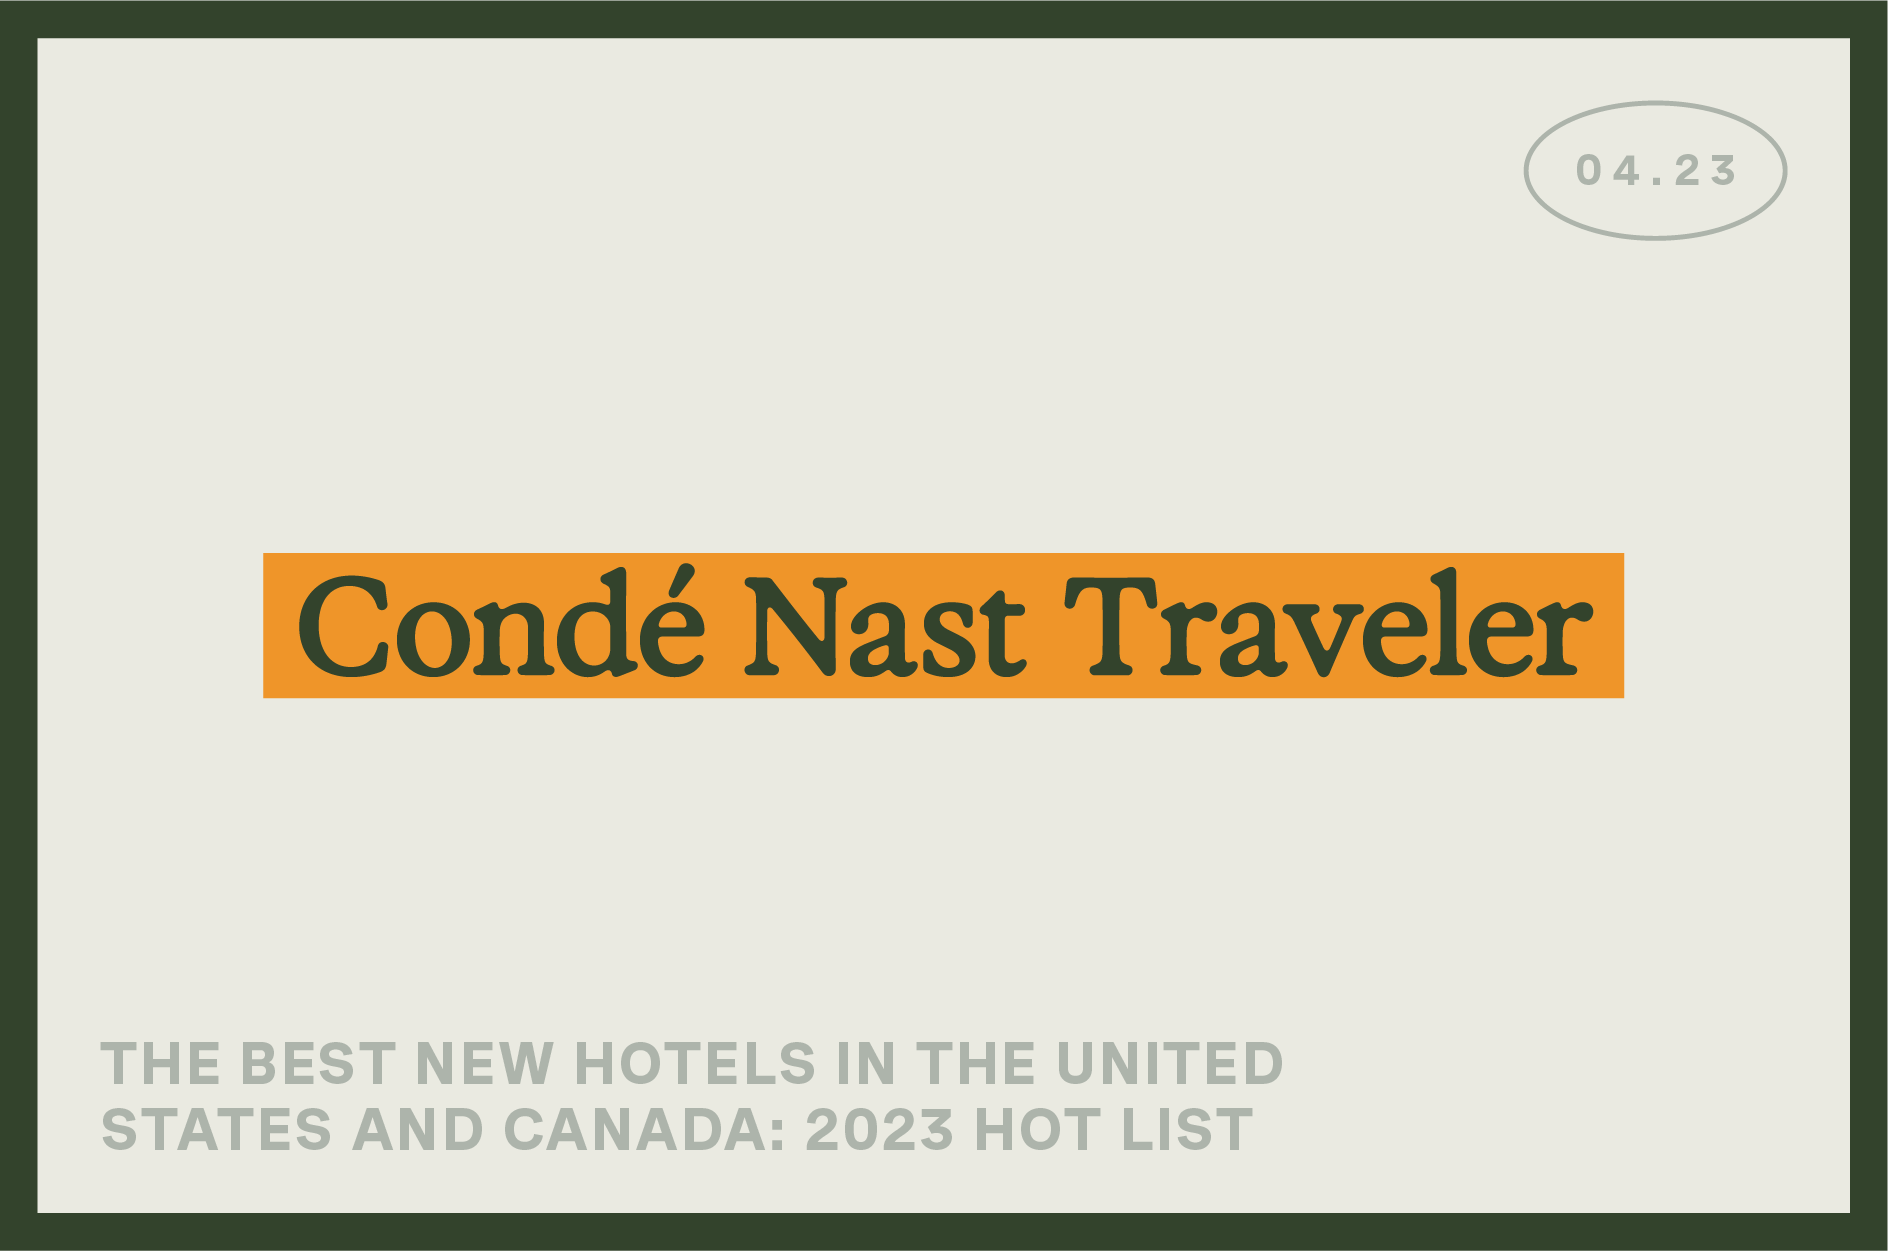 "Conde Nast Traveler" banner features "The best new hotels in the United States and Canada: 2023 Hot List.